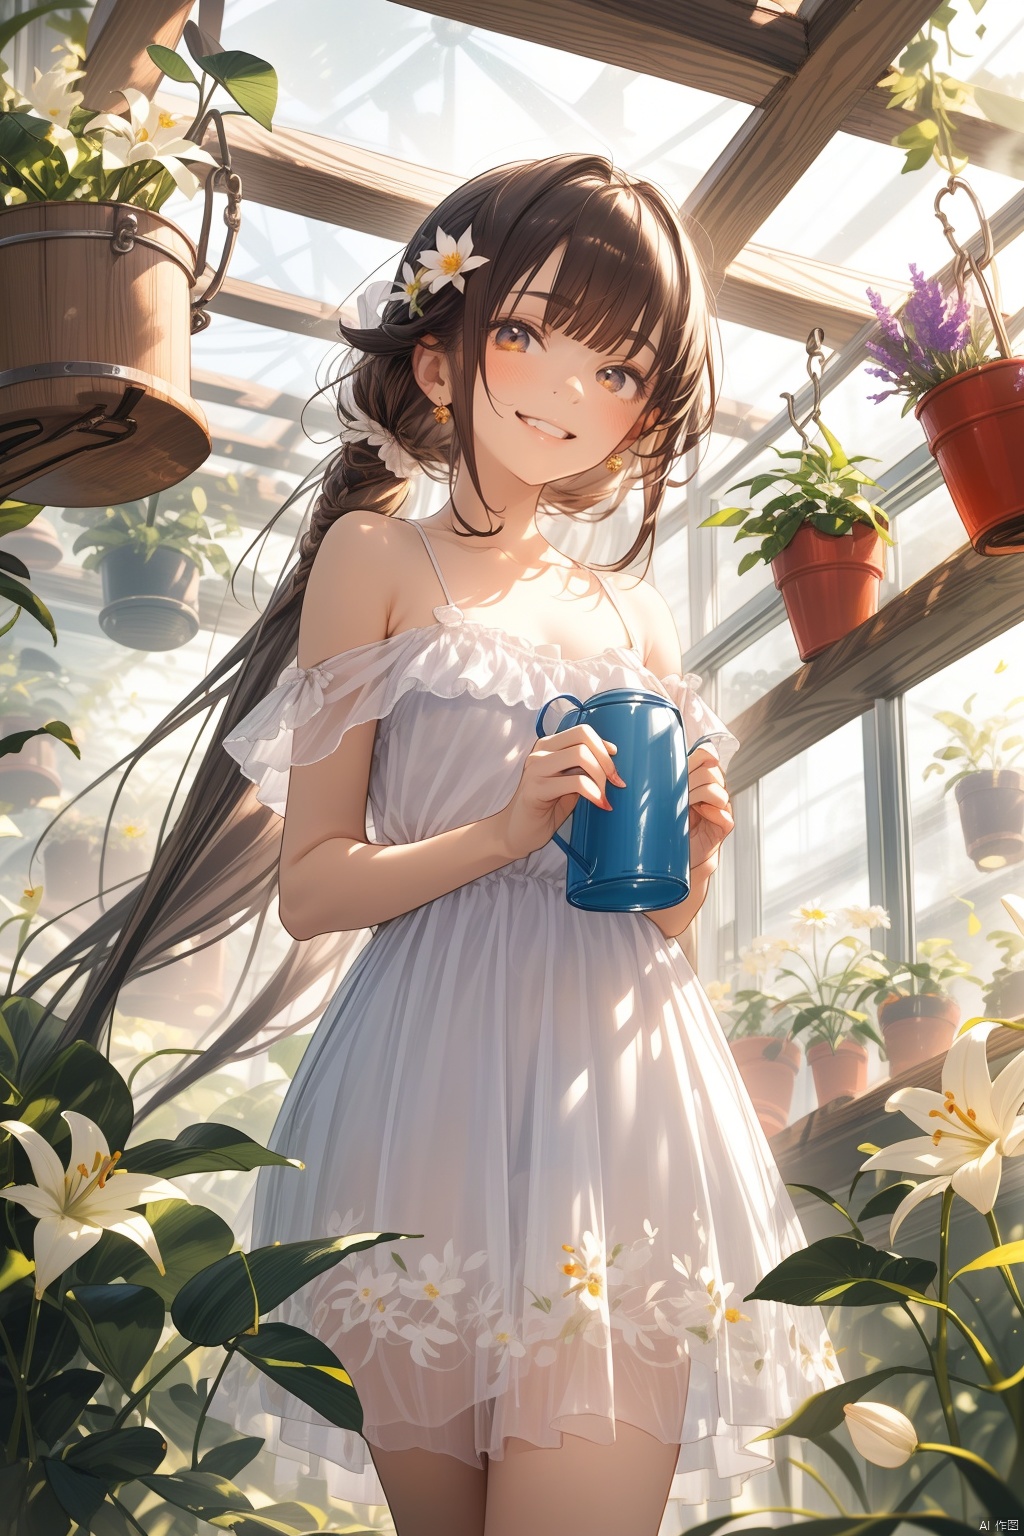  masterpiece, panorama,1 girl, solo_focus, long curly hair, double ponytail, smile, perfect body, delicate dress, hair ornament, with a watering can in her hands,the girl is watering the flowers,  a delicate greenhouse, glass roof, wood floors, deep of field, wooden shelves covered with potted plants, colorful flowers,lily of the valley, rose, daisy, lily,lavender, spring, flowers, backlight, mLD, Glass flower room, nai3, (\ji jian\), cozy anime